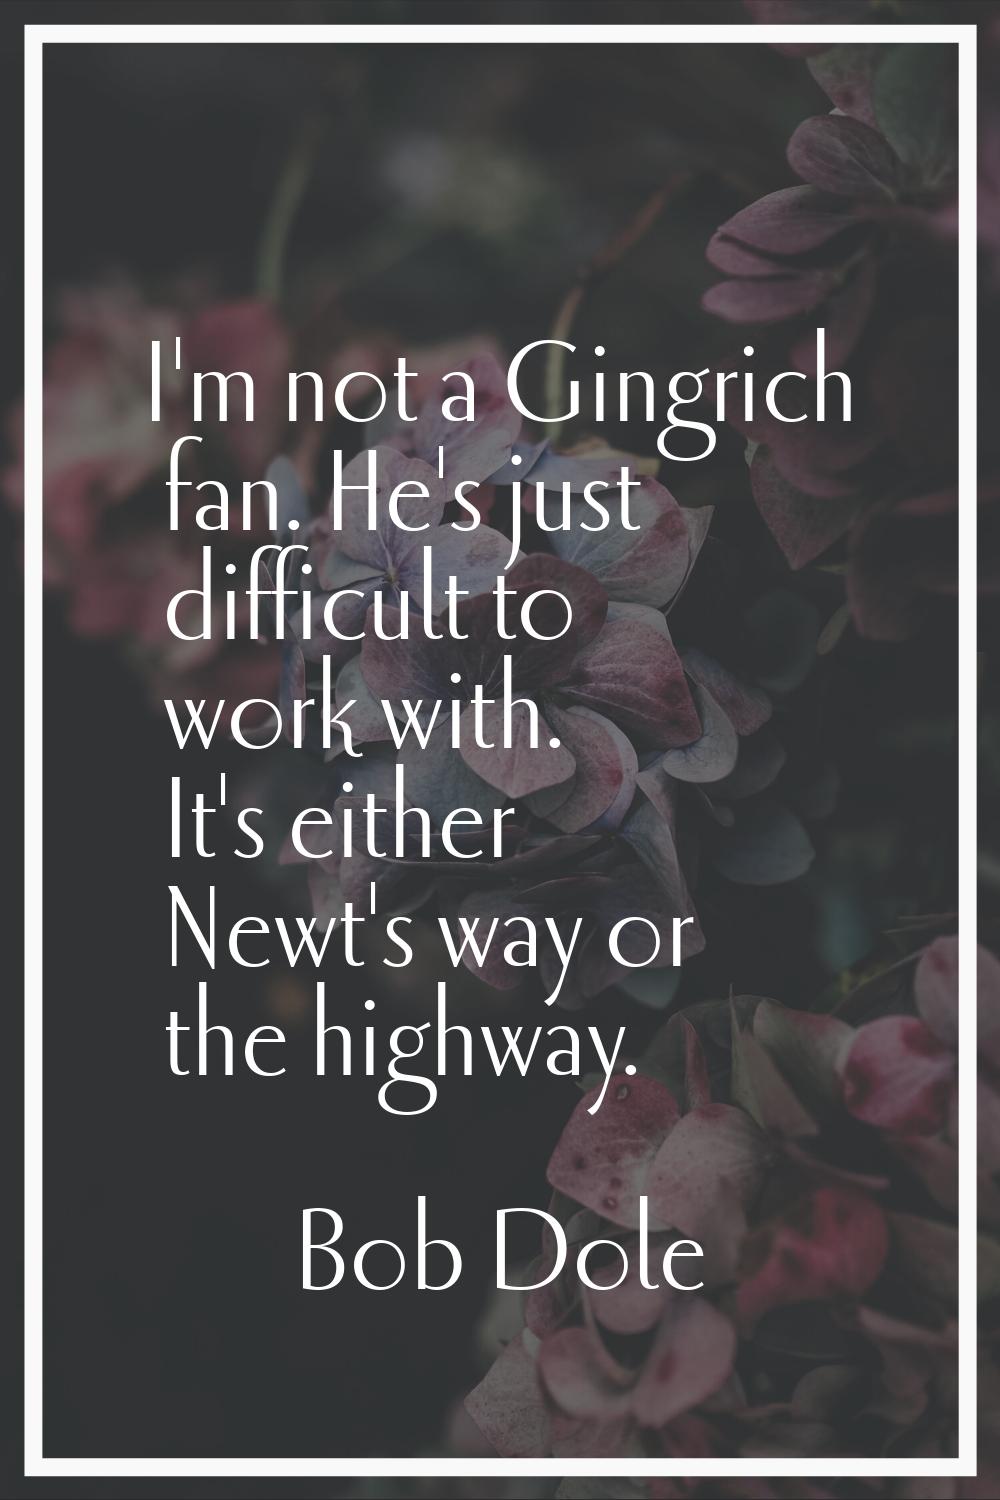 I'm not a Gingrich fan. He's just difficult to work with. It's either Newt's way or the highway.